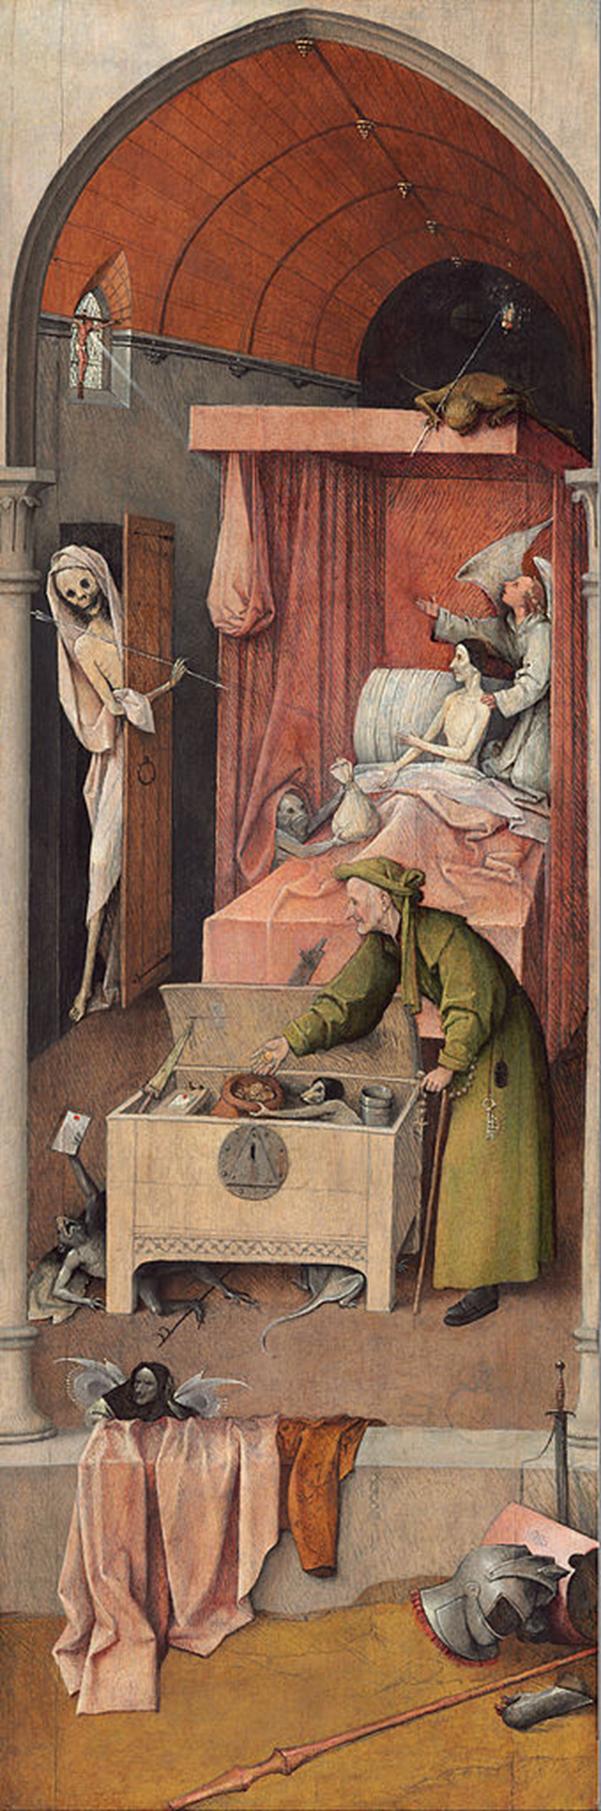 340px-Hieronymus_Bosch_-_Death_and_the_Miser_-_Google_Art_Project